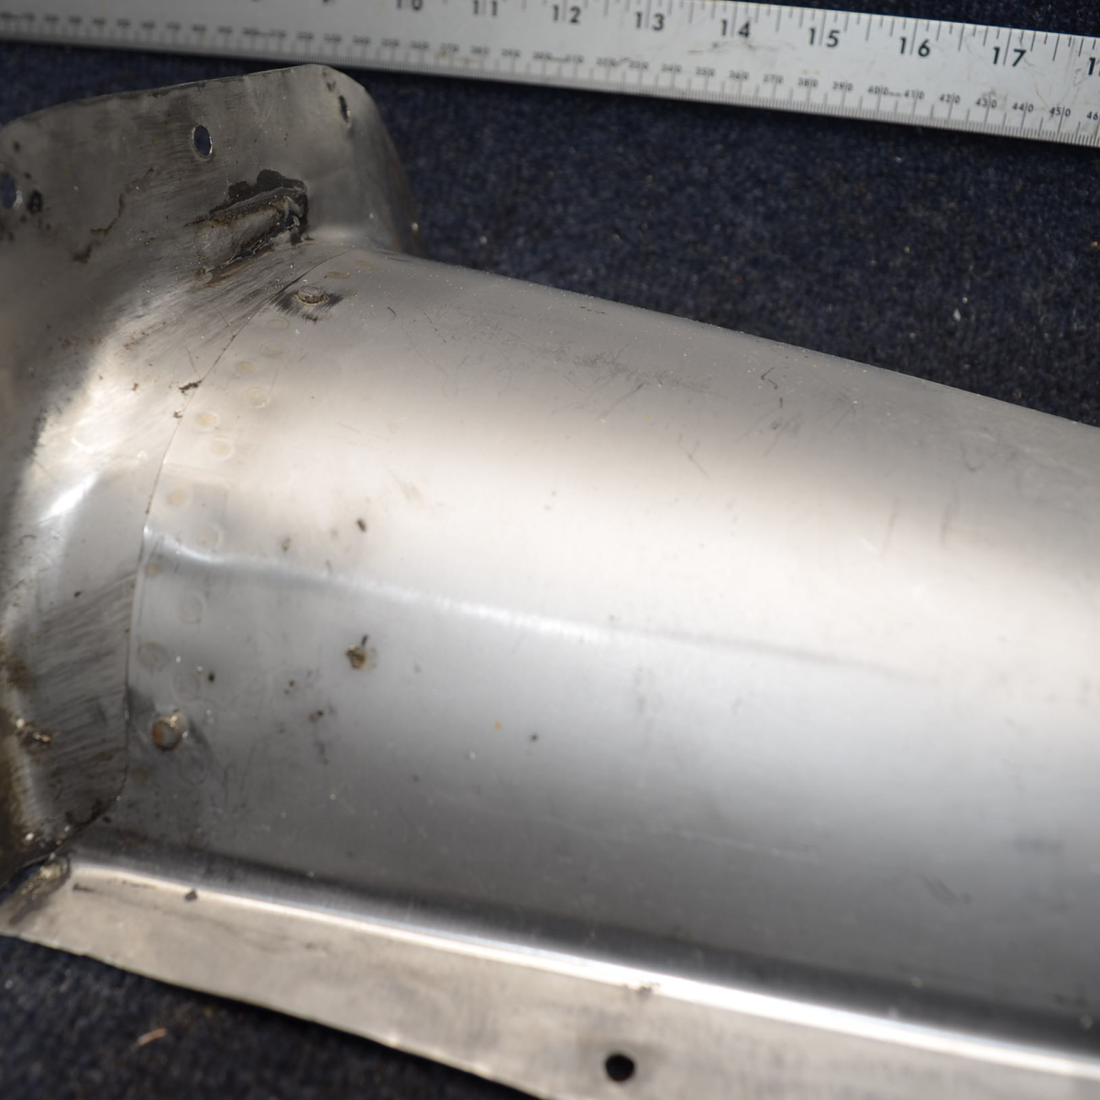 Used aircraft parts for sale, 630100-503 Mooney  [part_model] Mooney M20J EXHAUST CAVITY RH